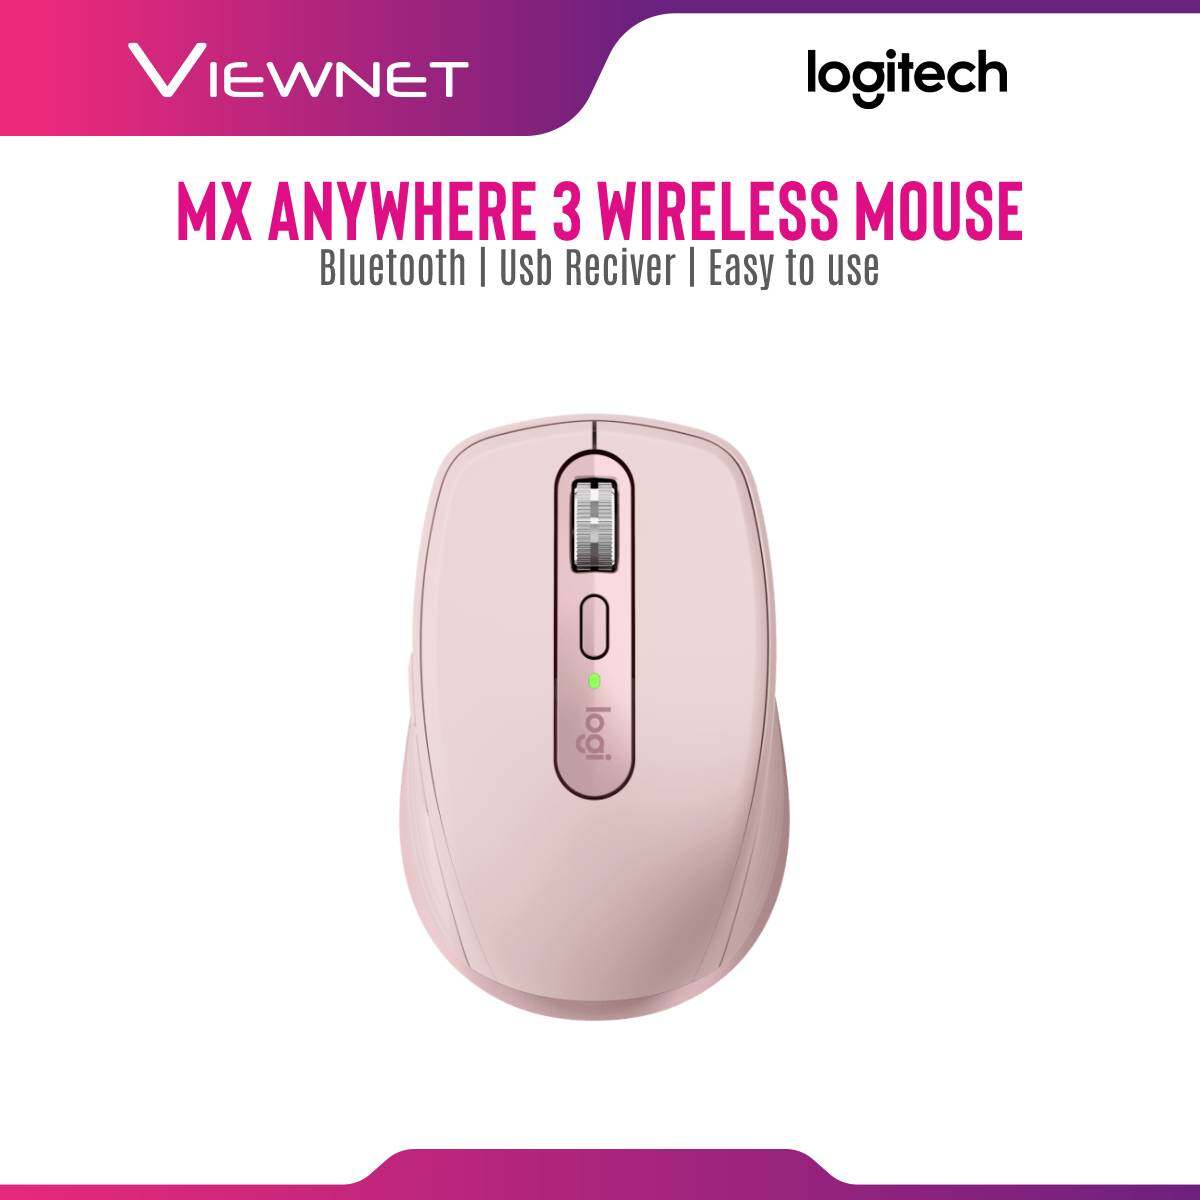 Logitech MX Anywhere 3 Master series of wireless mouse Ultimate versatility with remarkable performance (910-005994) ROSE 